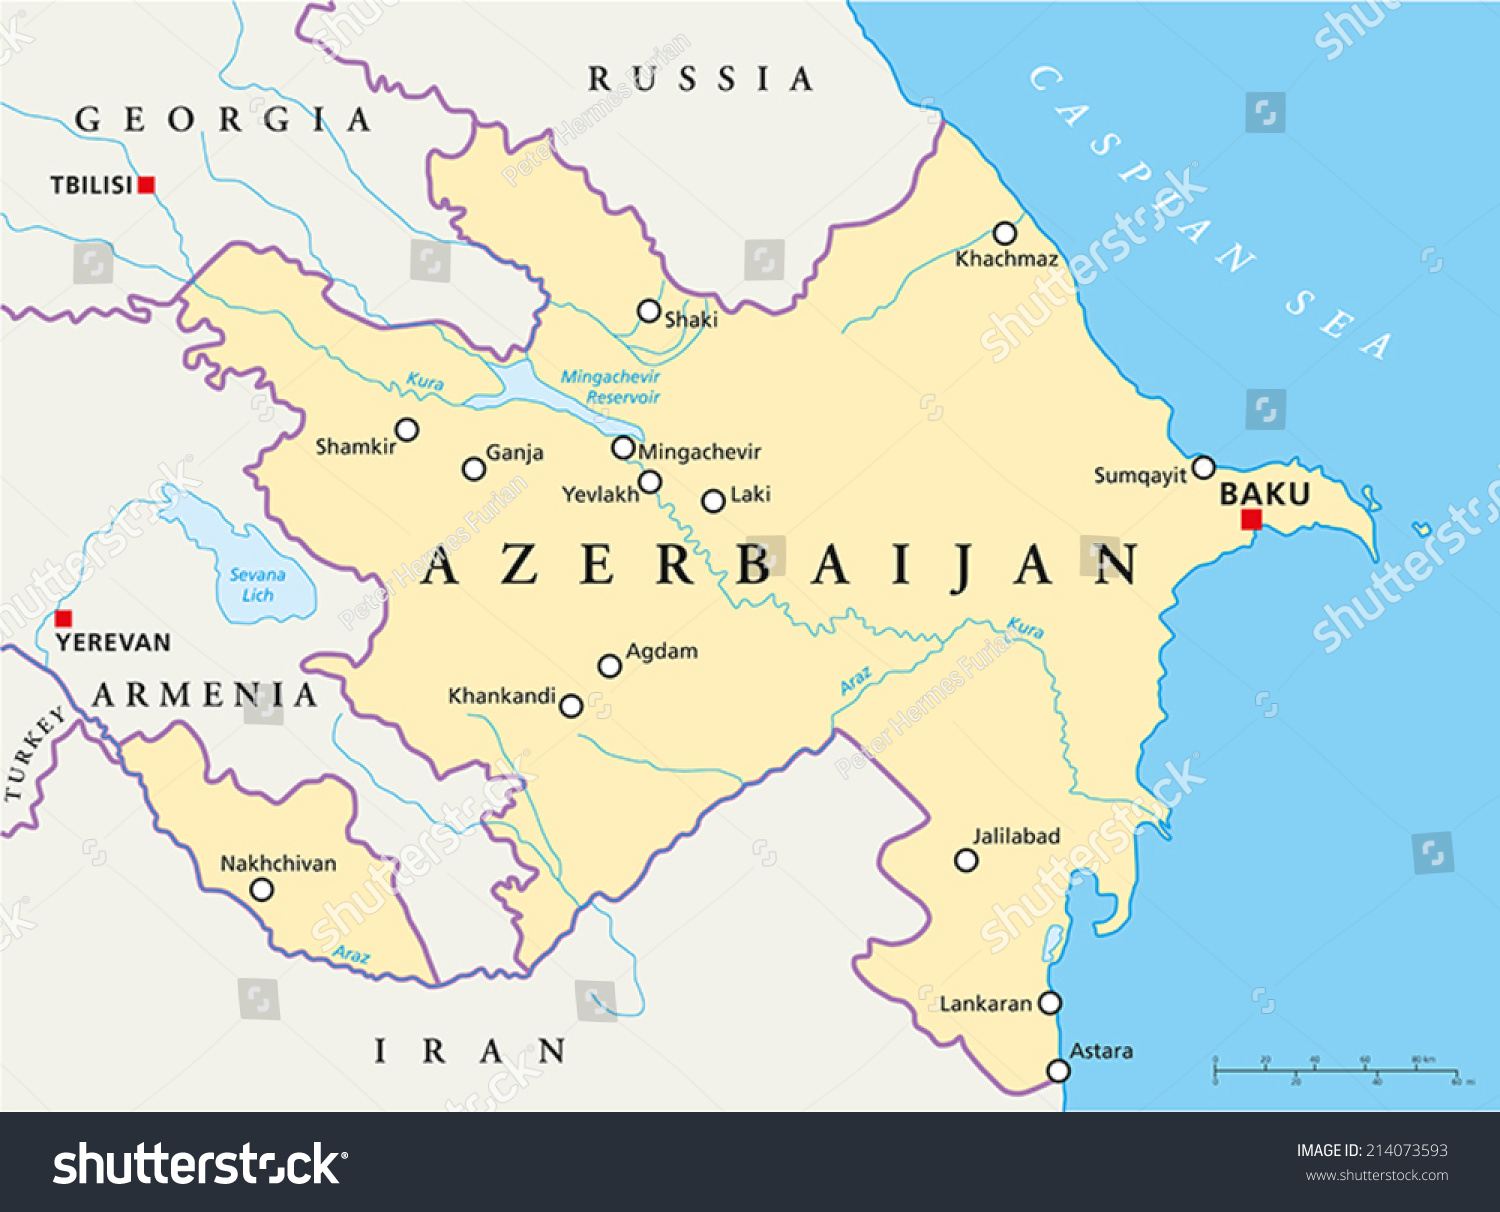 SVG of Azerbaijan Political Map with capital Baku, national borders, most important cities, rivers and lakes. English labeling and scaling. Illustration. svg